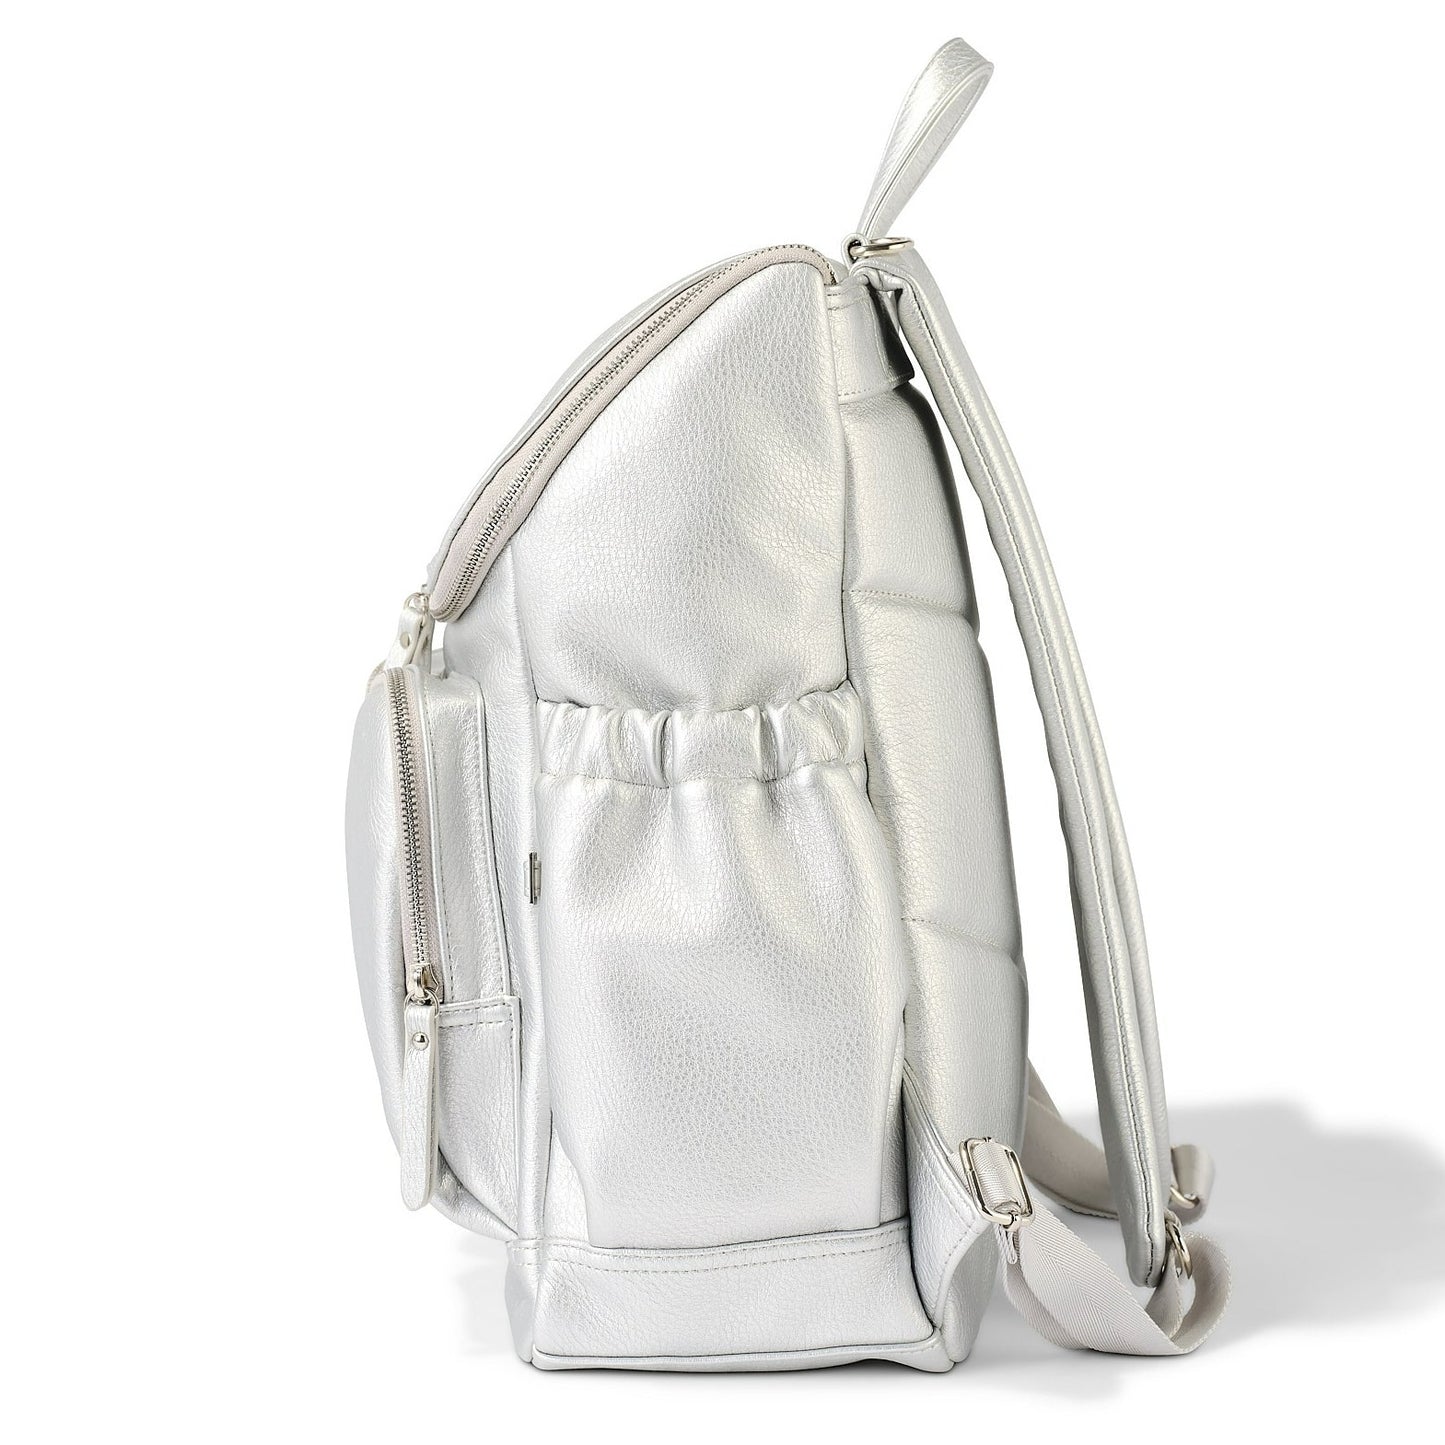 Dimple Faux Leather Diaper Backpack - Metallic